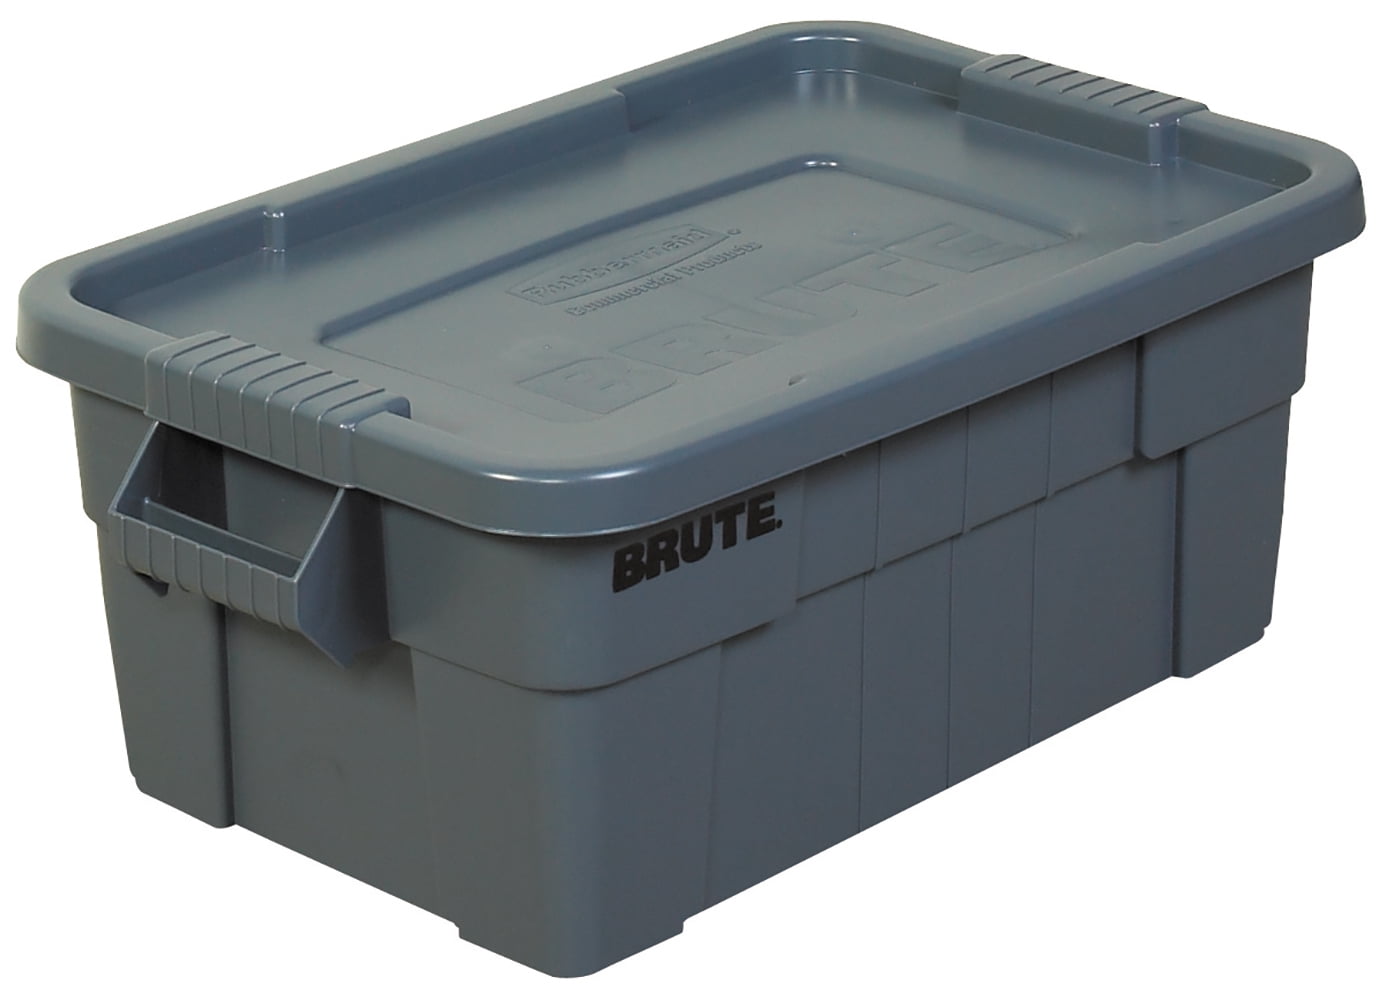  RUBFG9S3100GRAY  Rubbermaid Commercial Brute Tote w/Lid 20G -  Gray - 6 Pack